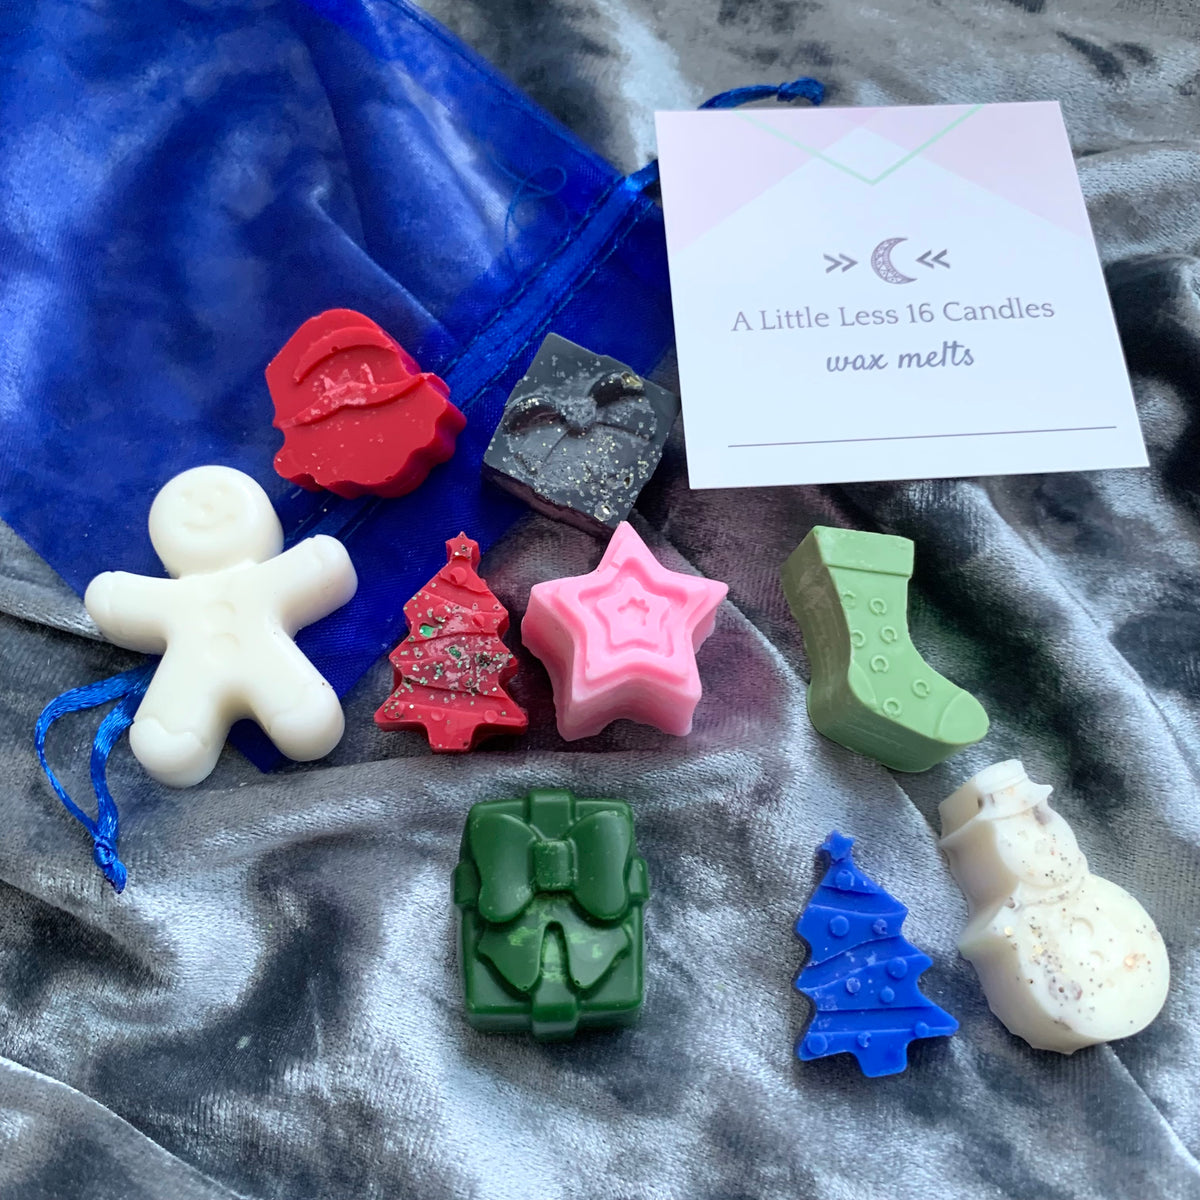 Assorted Holiday Wax Melts – A Little Less 16 Candles